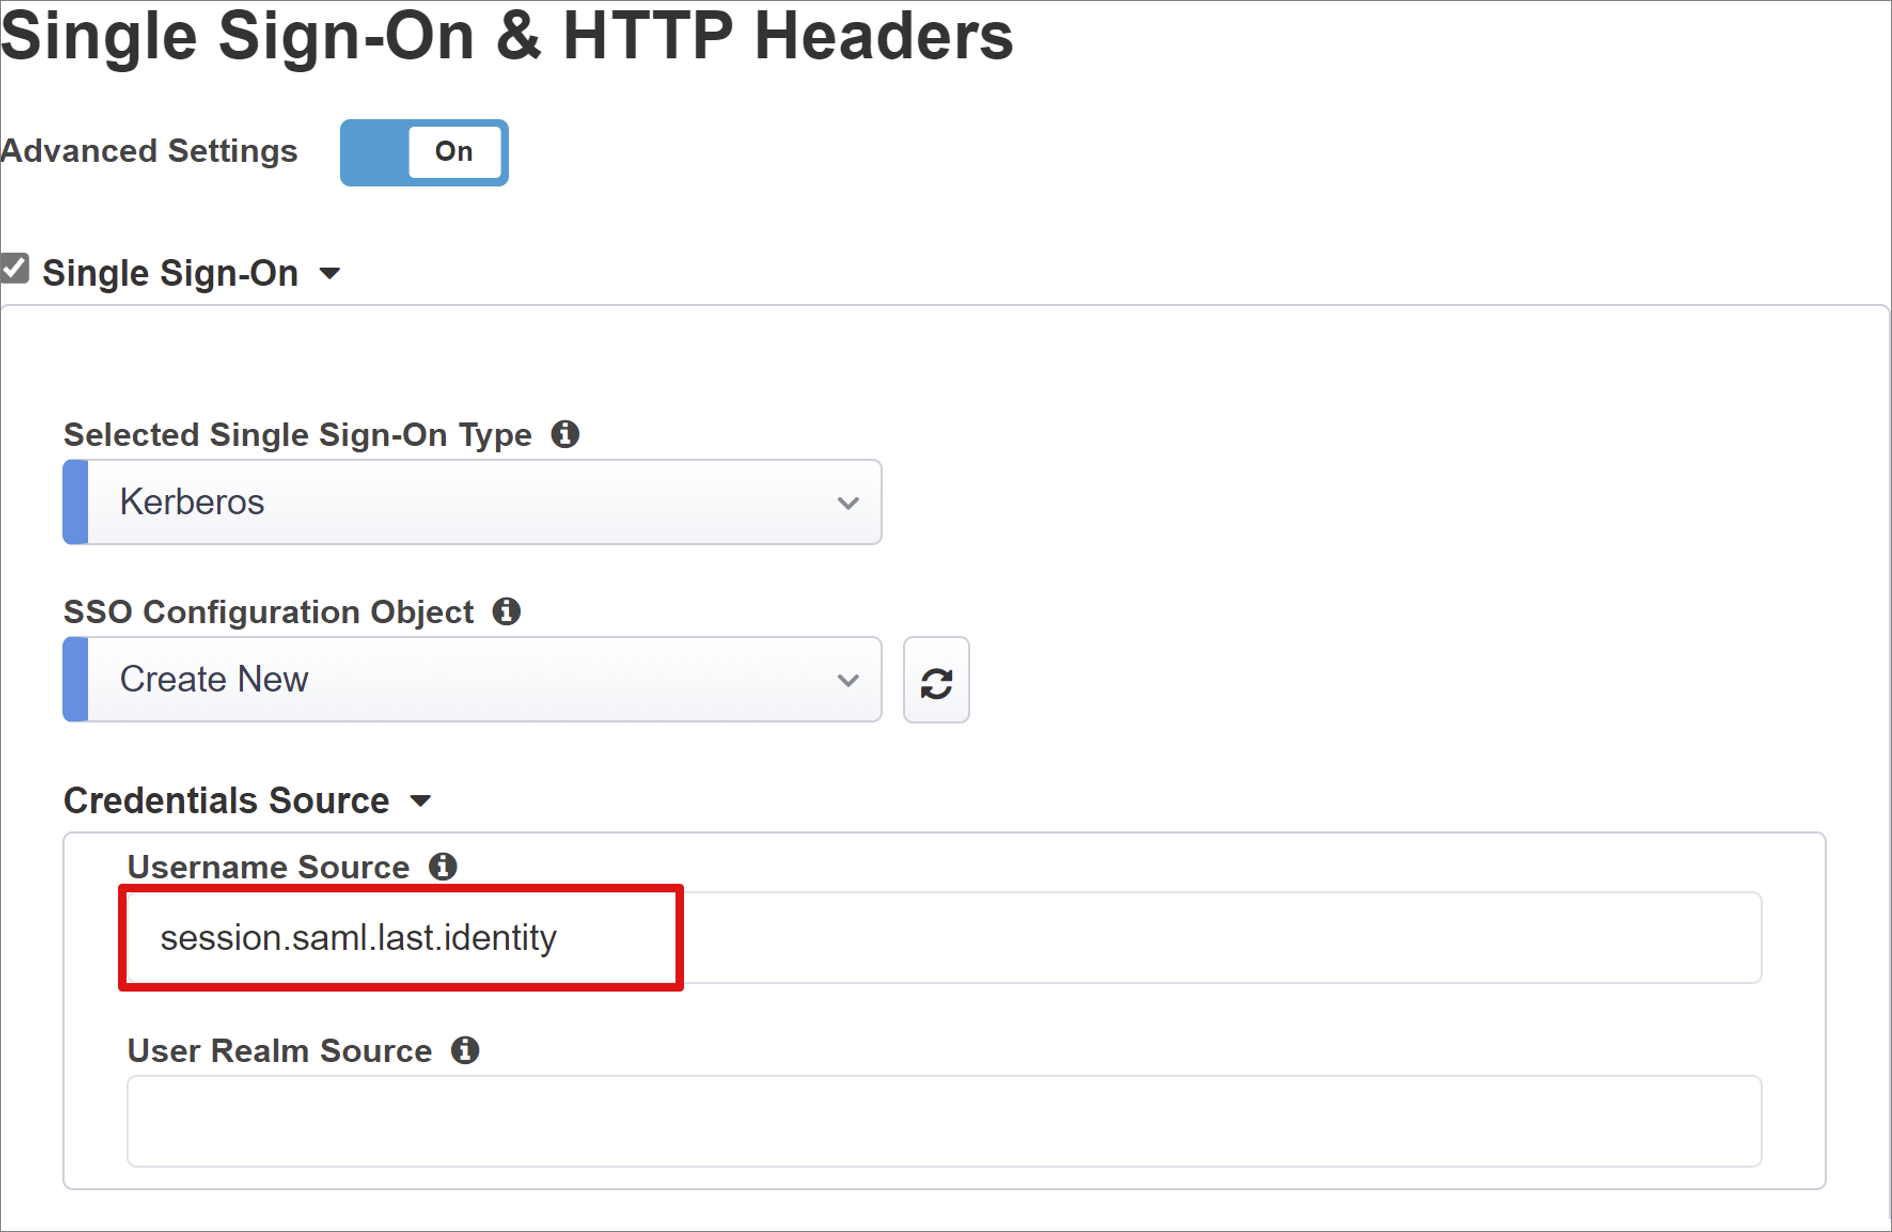 Screenshot of options and selections for single sign-on and HTTP Headers.